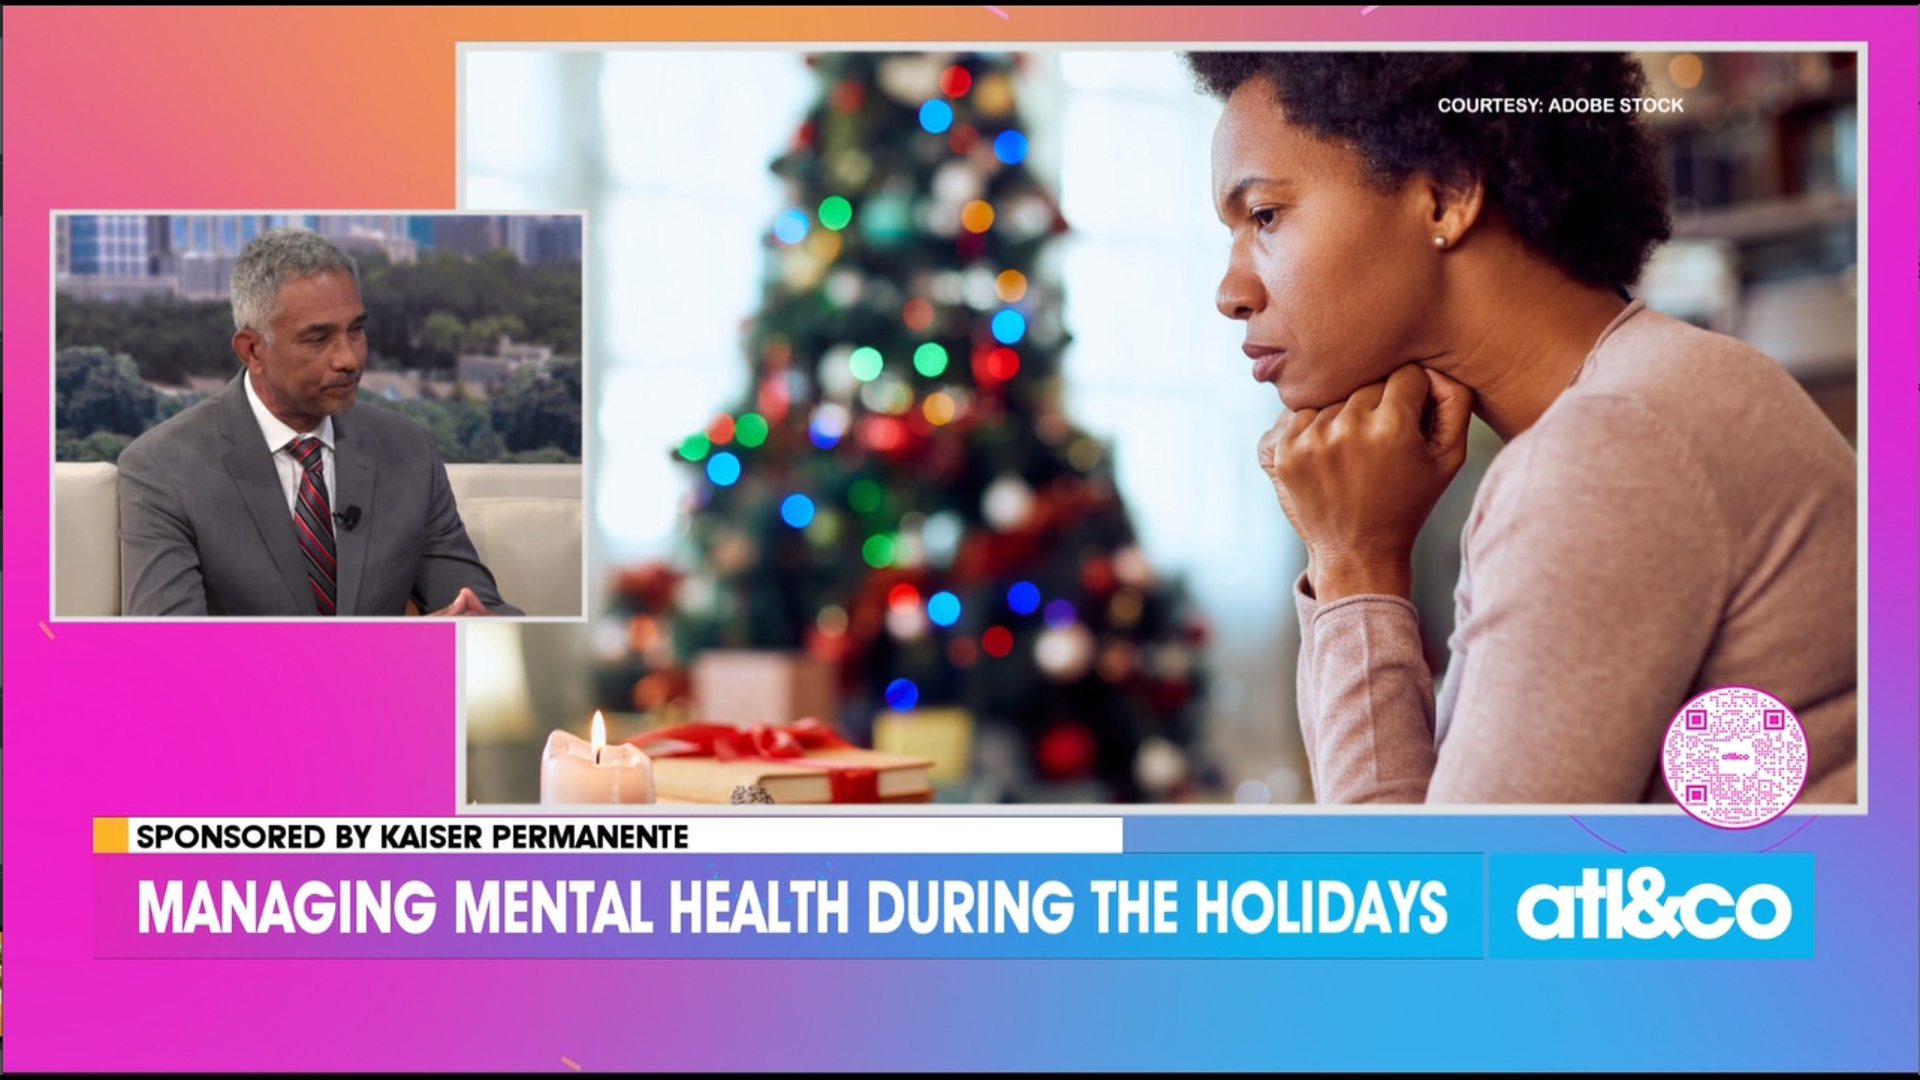 Dr. Marcus Griffith from Kaiser Permanente shares top mental health tips for managing the stressful holiday season.